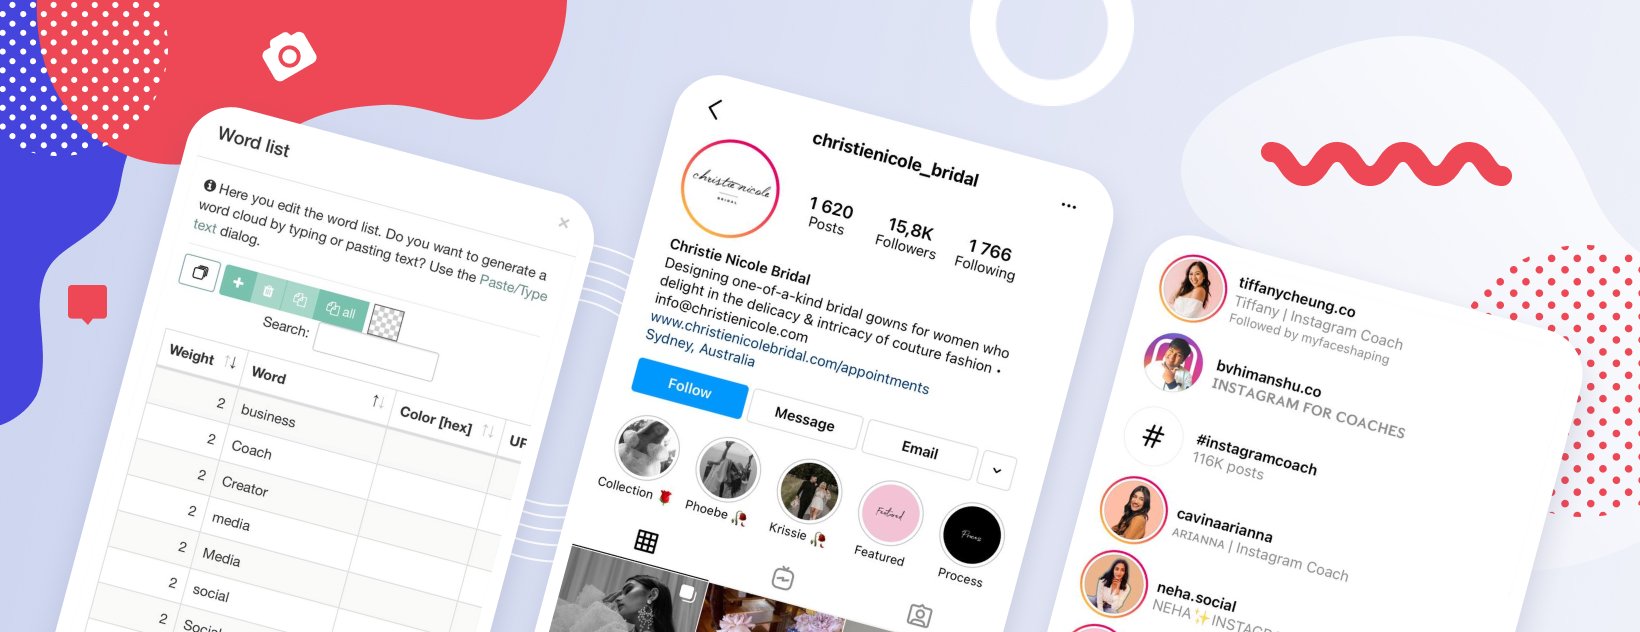 Instagram filters for Stories: 3 Instagram filter artists & 3 ways to search filters on IG